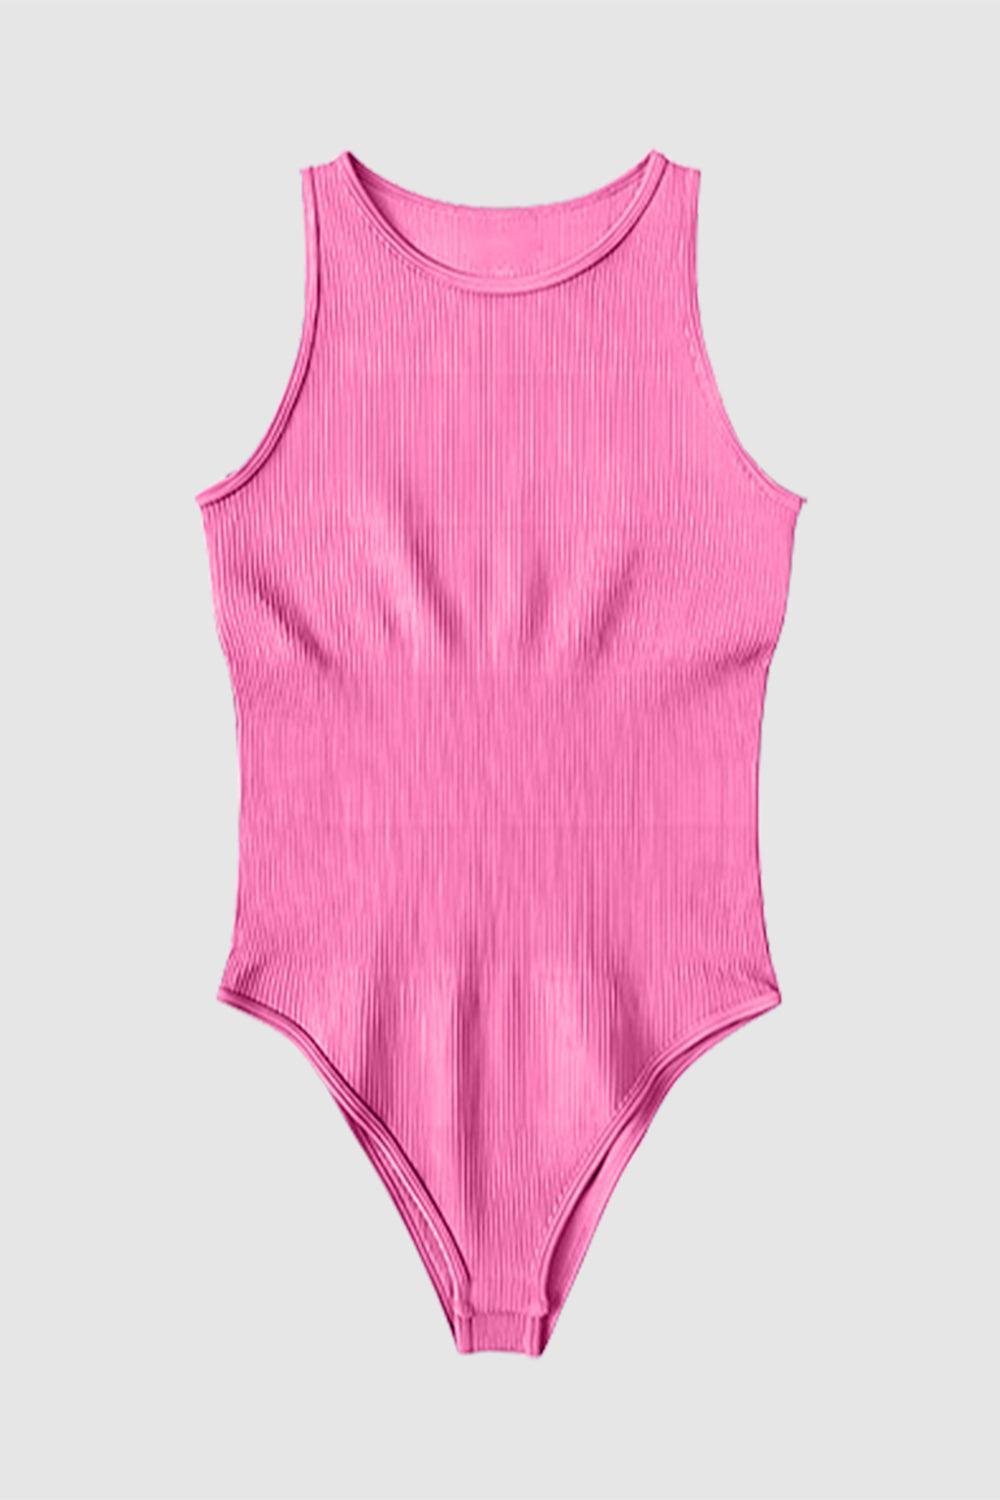 a pink bodysuit is shown against a white background